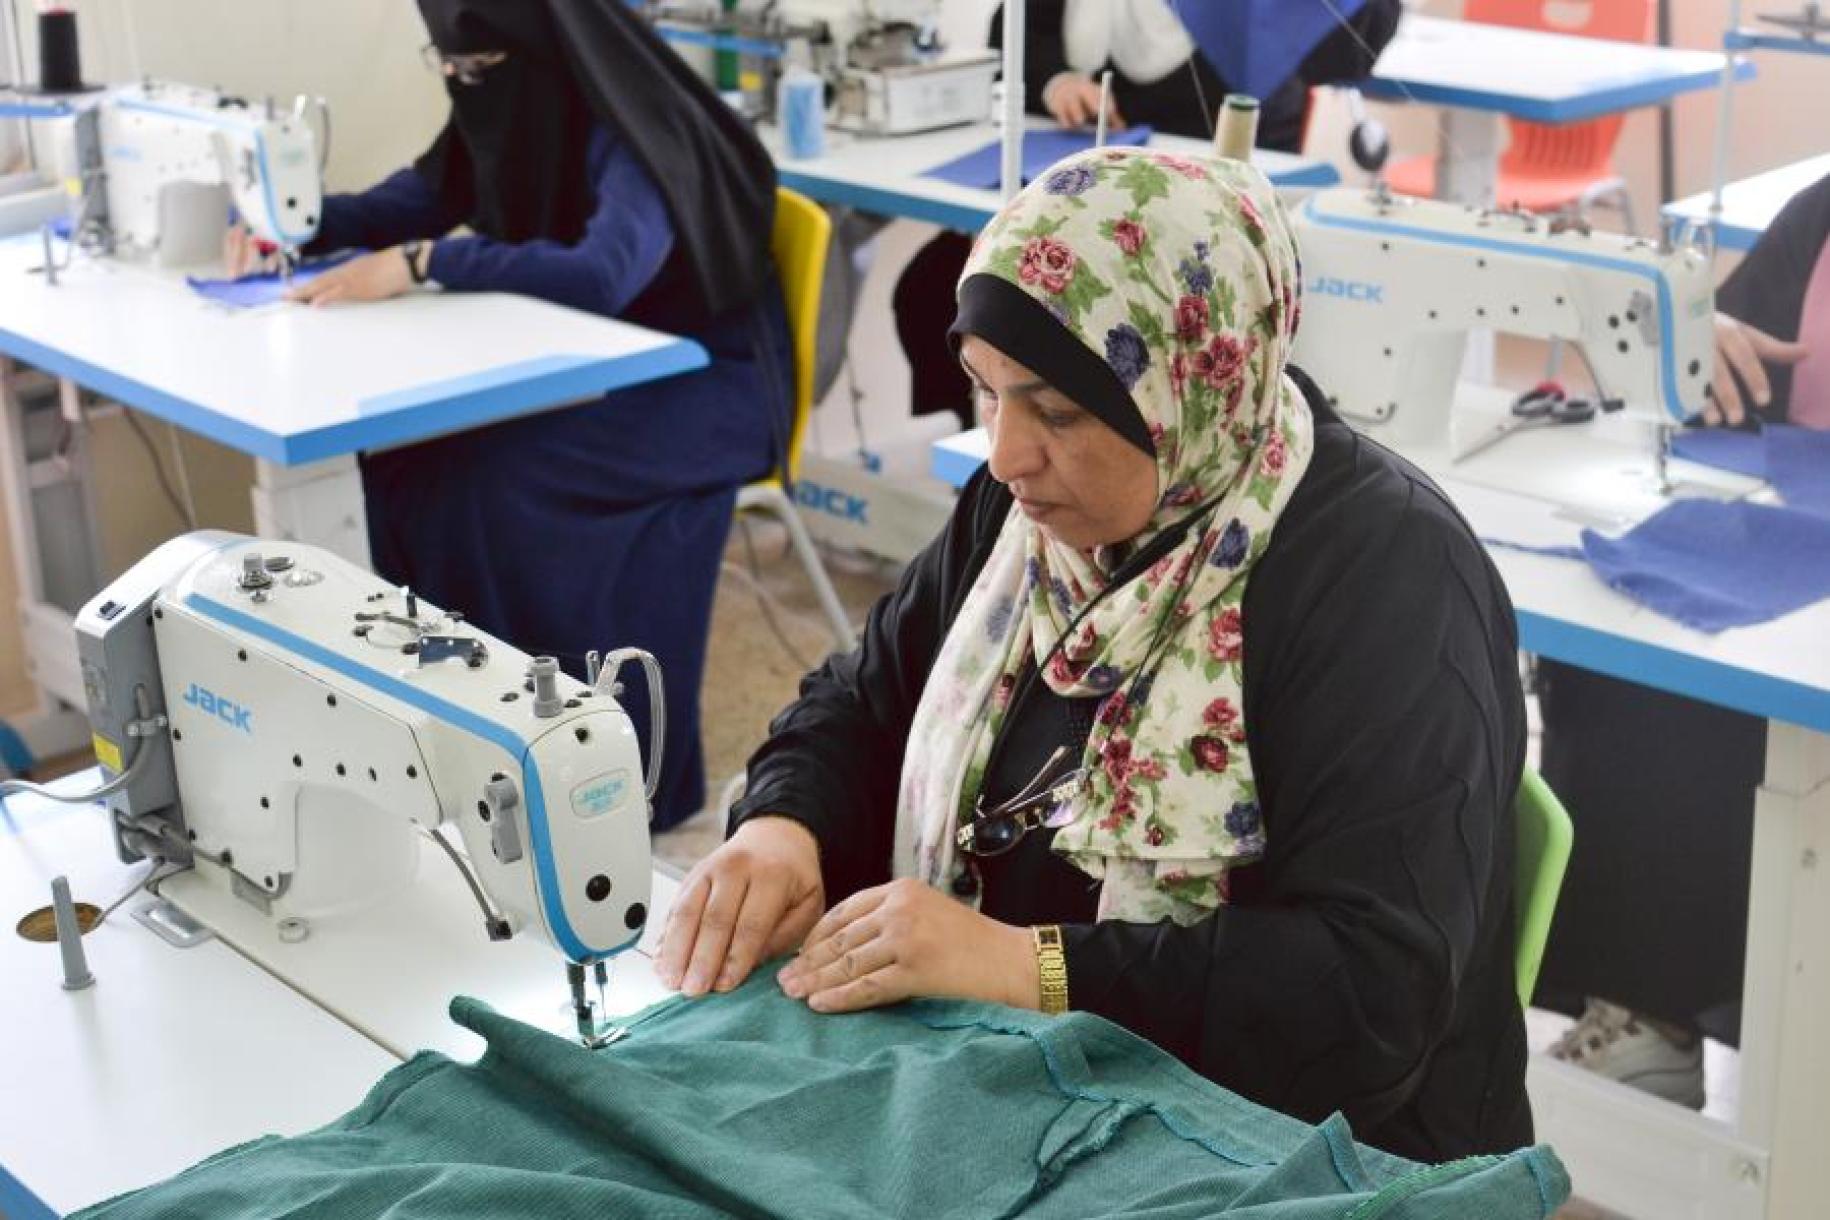 After completing her training, Abeer established her own tailor business from home, continually improving her skills